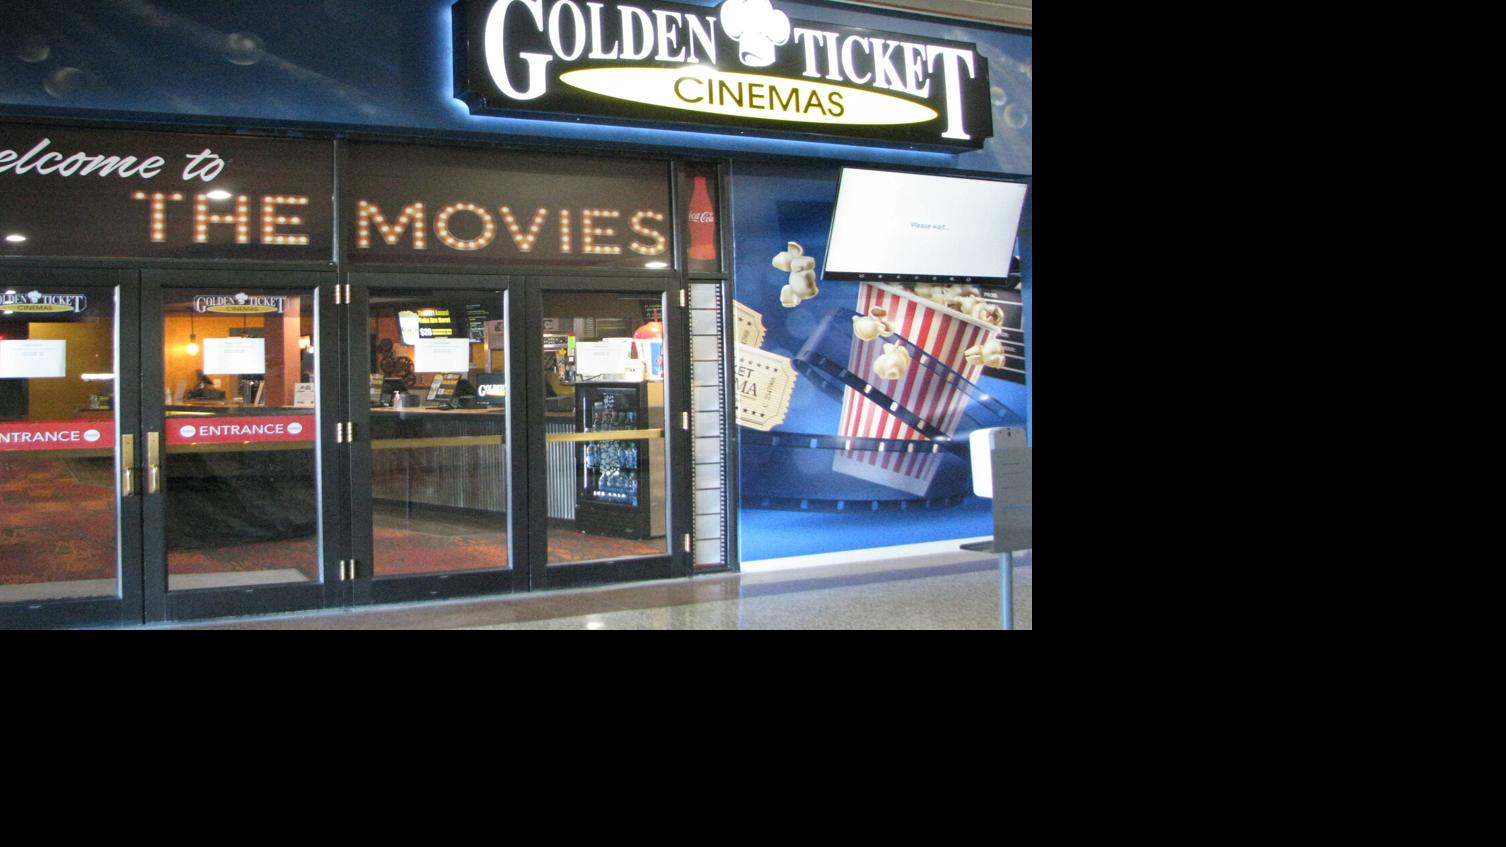 Forget about COVID-19 at Kearney's Hilltop Mall luxury Golden Ticket Cinemas